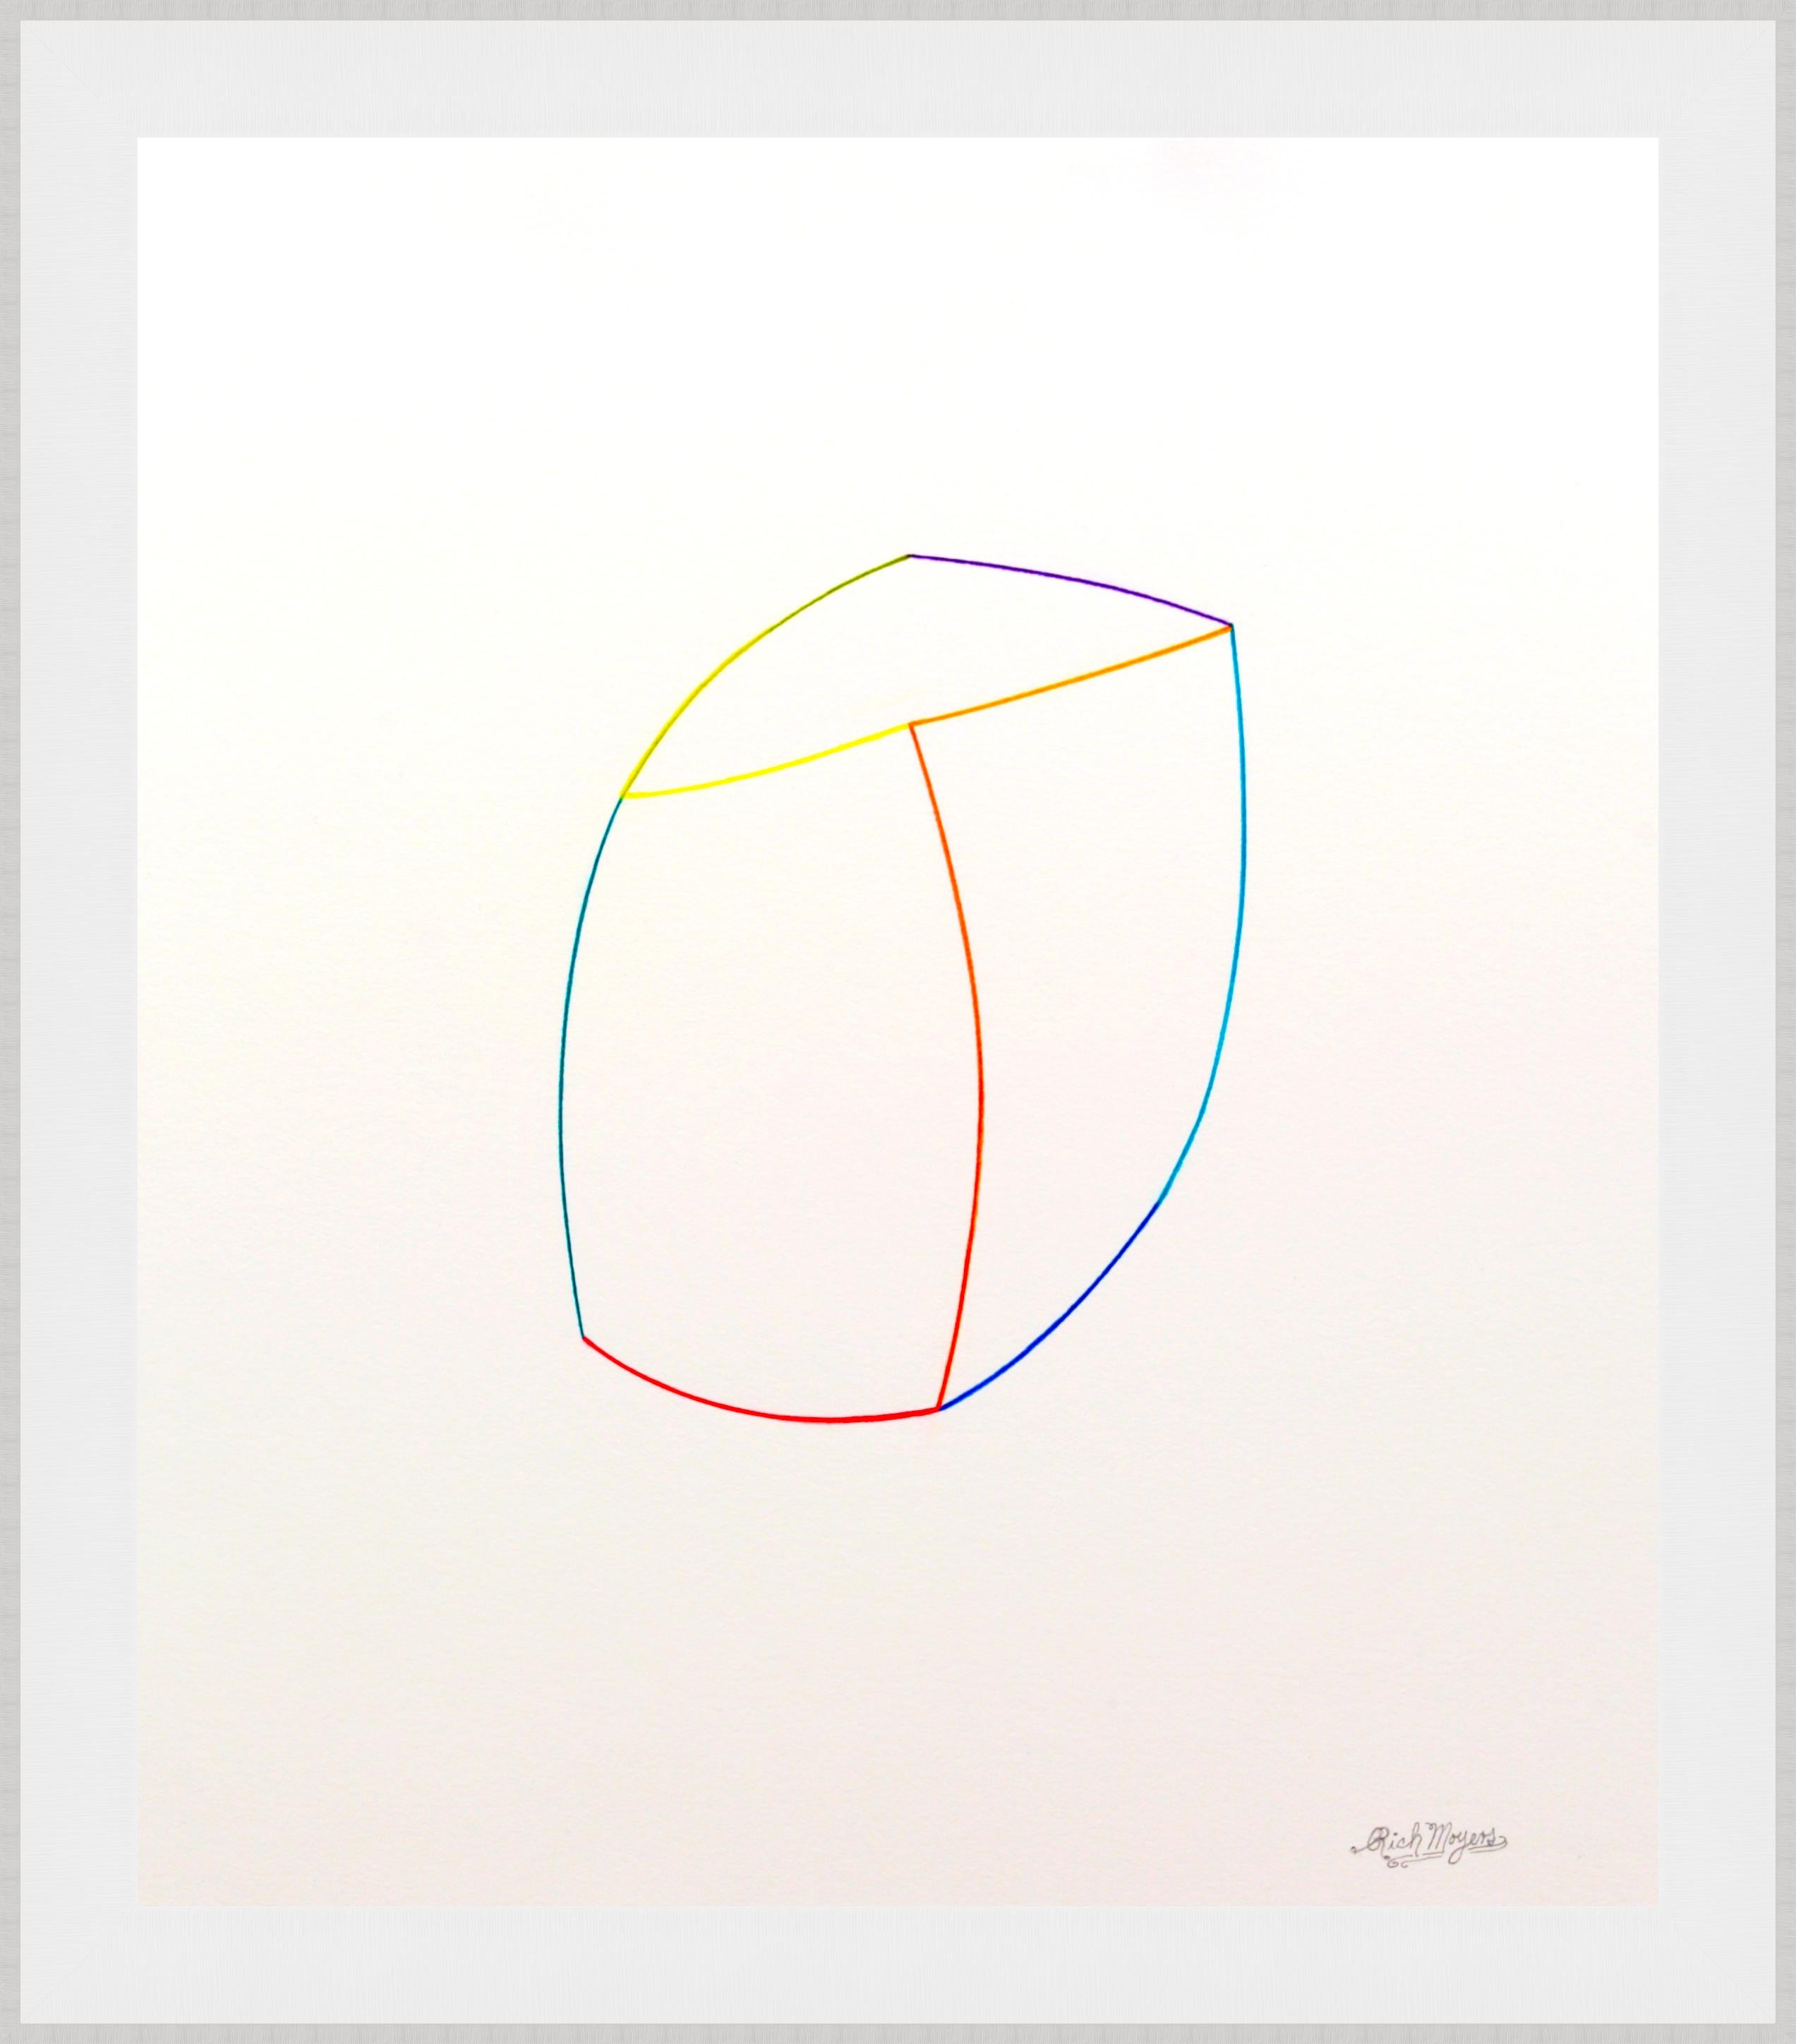 UNTITLED #2 - Modern / Minimal Line Drawing, Drawing, Pencil/Colored Pencil on W For Sale 1